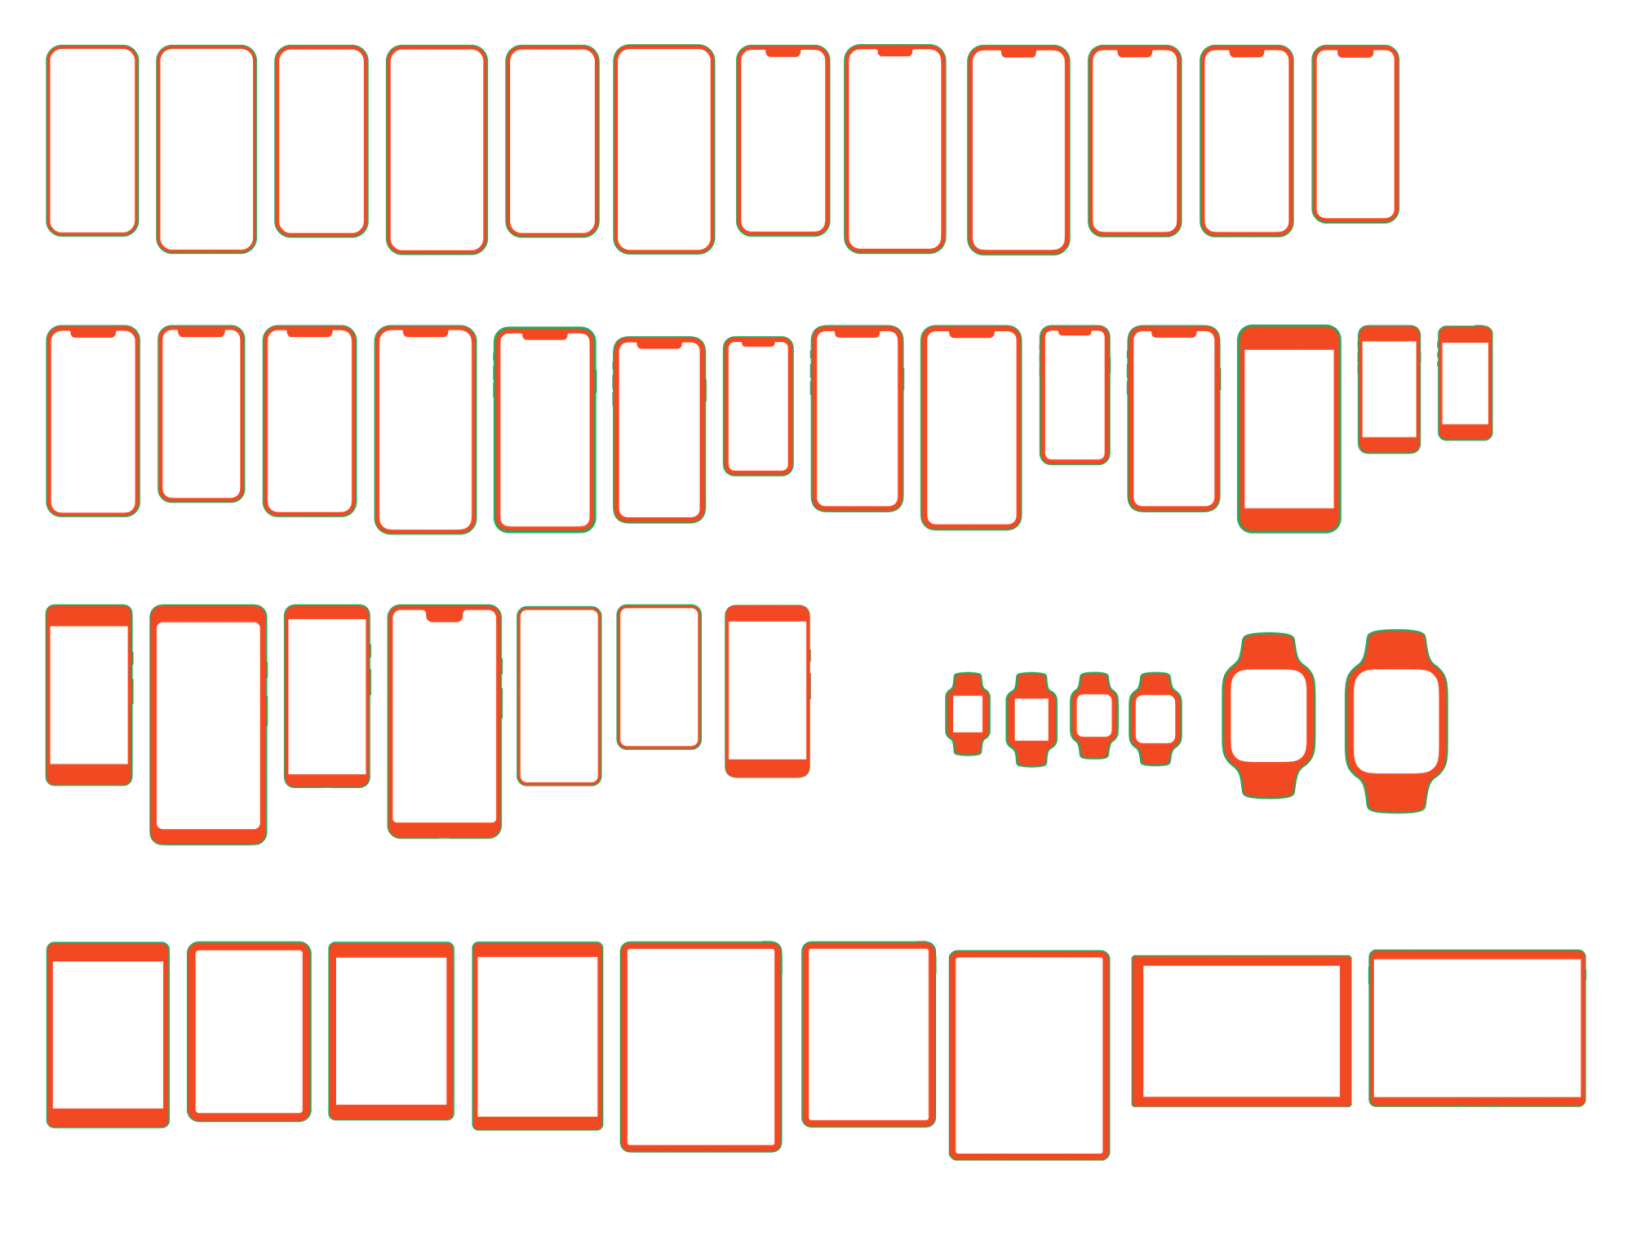 A collection of red outlines representing various Apple and Google devices, including iPhones, iPads, and watches, laid out in a grid format for design selection.